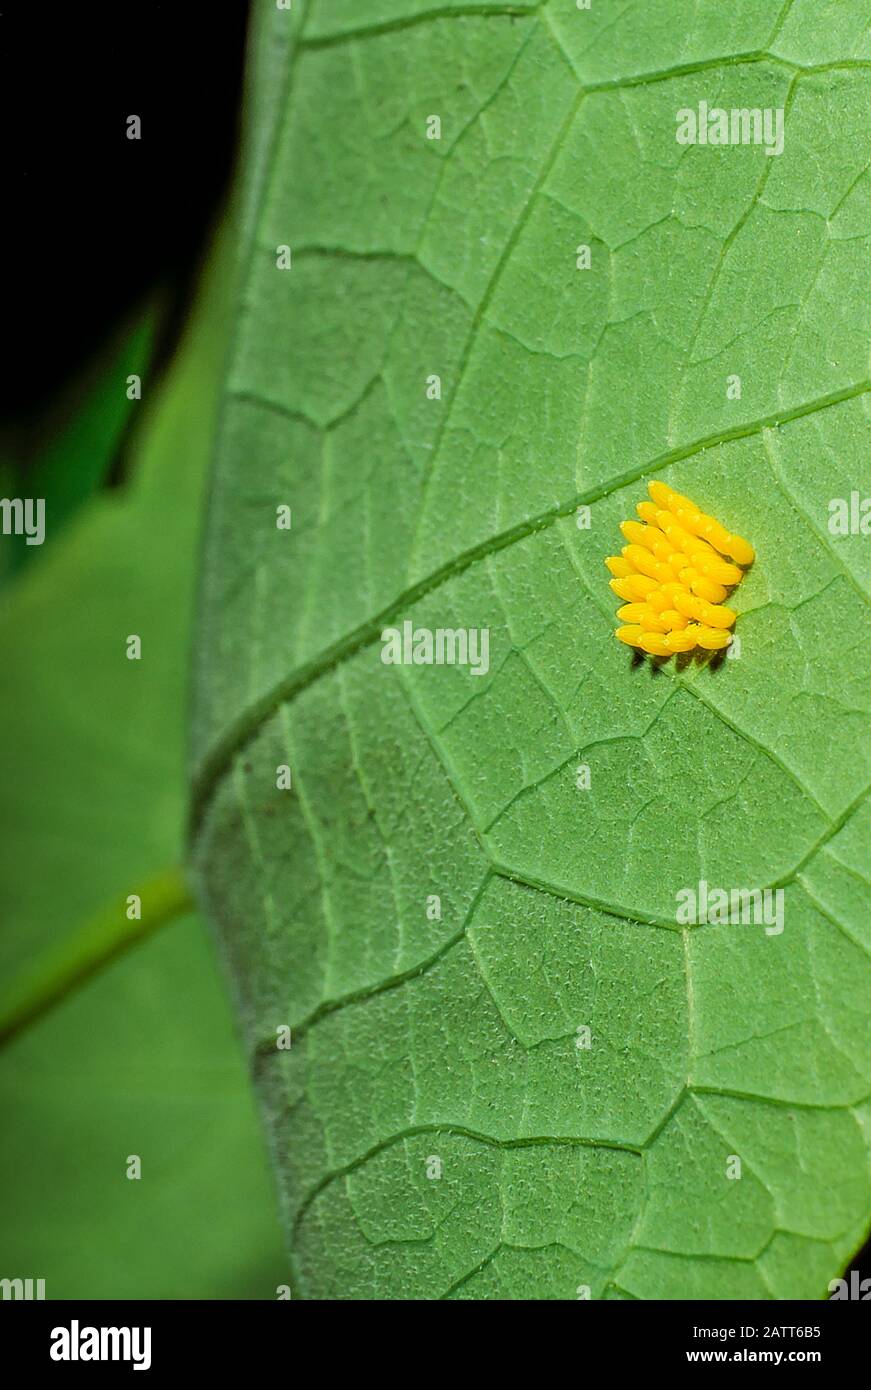 Cluster of eggs laid by a Large White Pieris brassicae butterfly on a Nasturtium leaf. Stock Photo